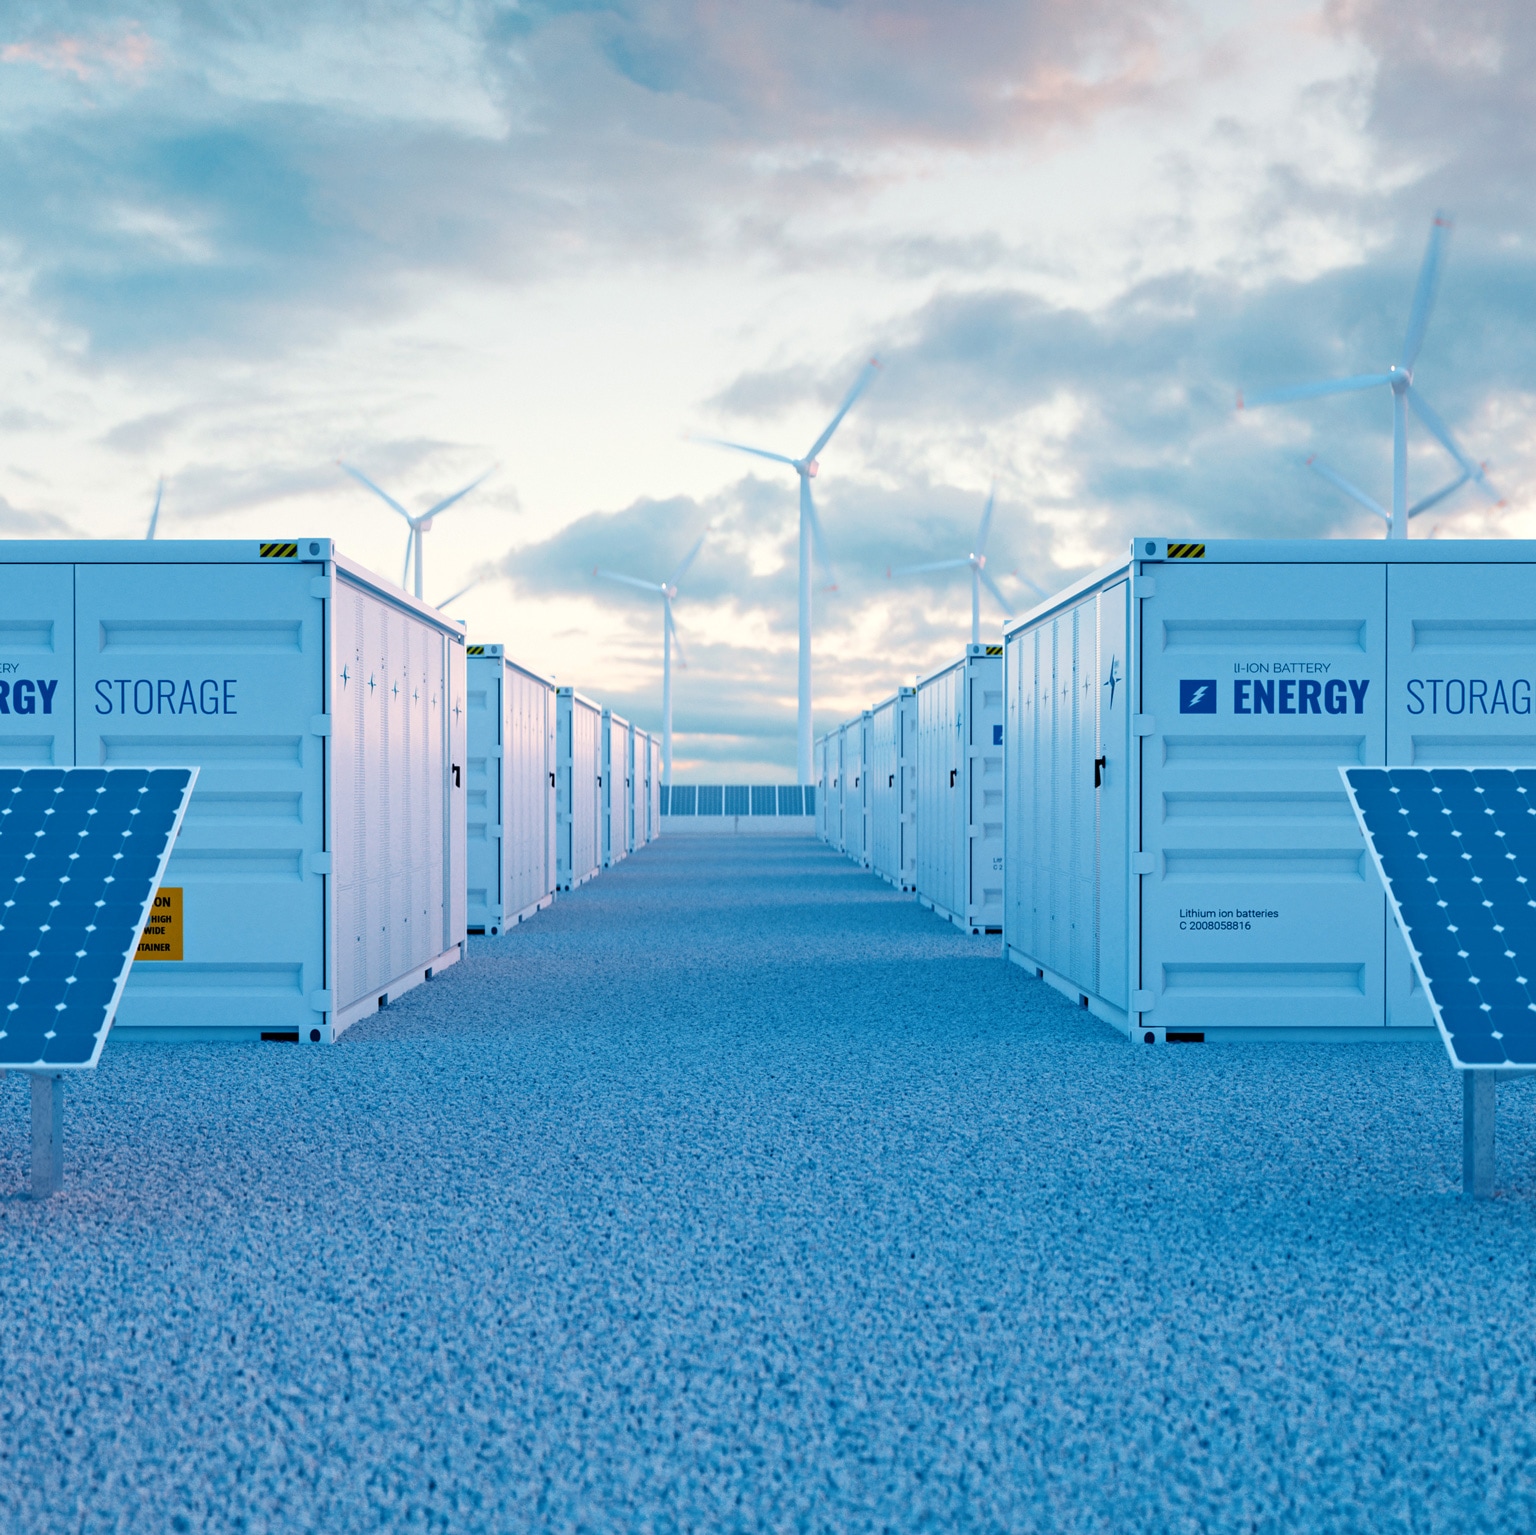 Enabling renewable energy with battery energy storage systems | McKinsey